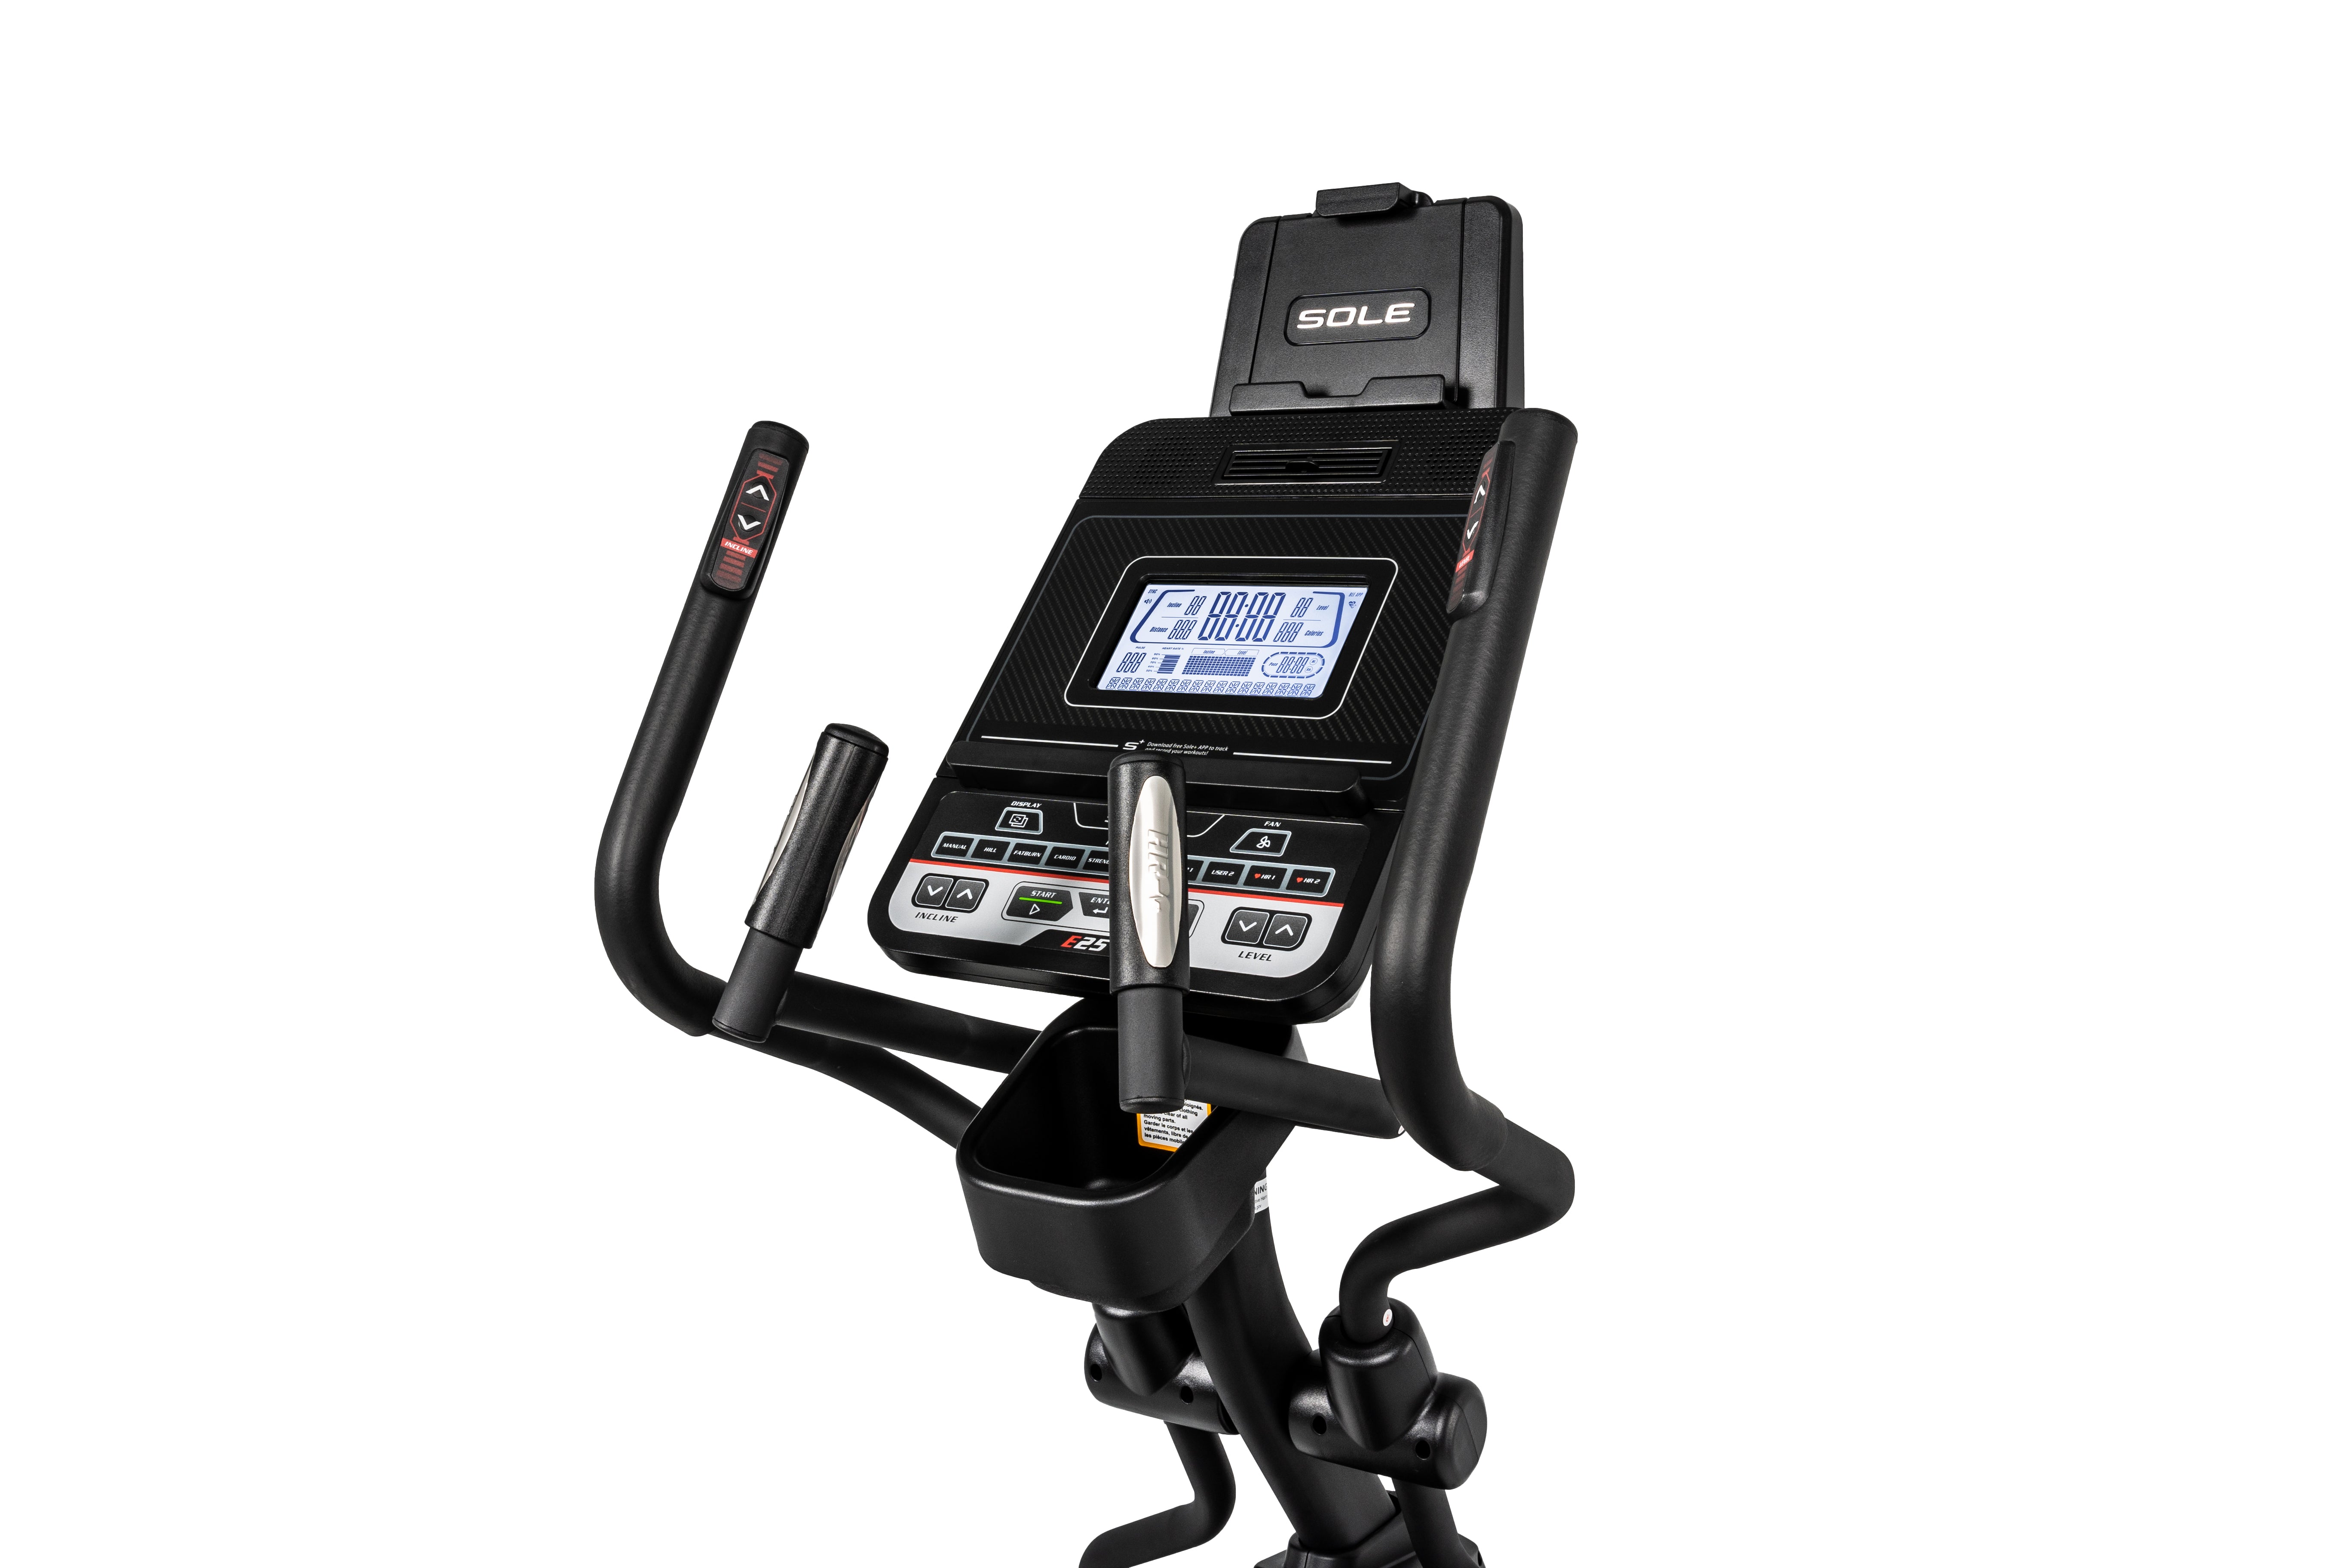 Angled view of the Sole E25 elliptical machine showcasing the digital console with workout metrics, control buttons, handlebars with adjustment buttons, and ergonomic design, set against a white background.